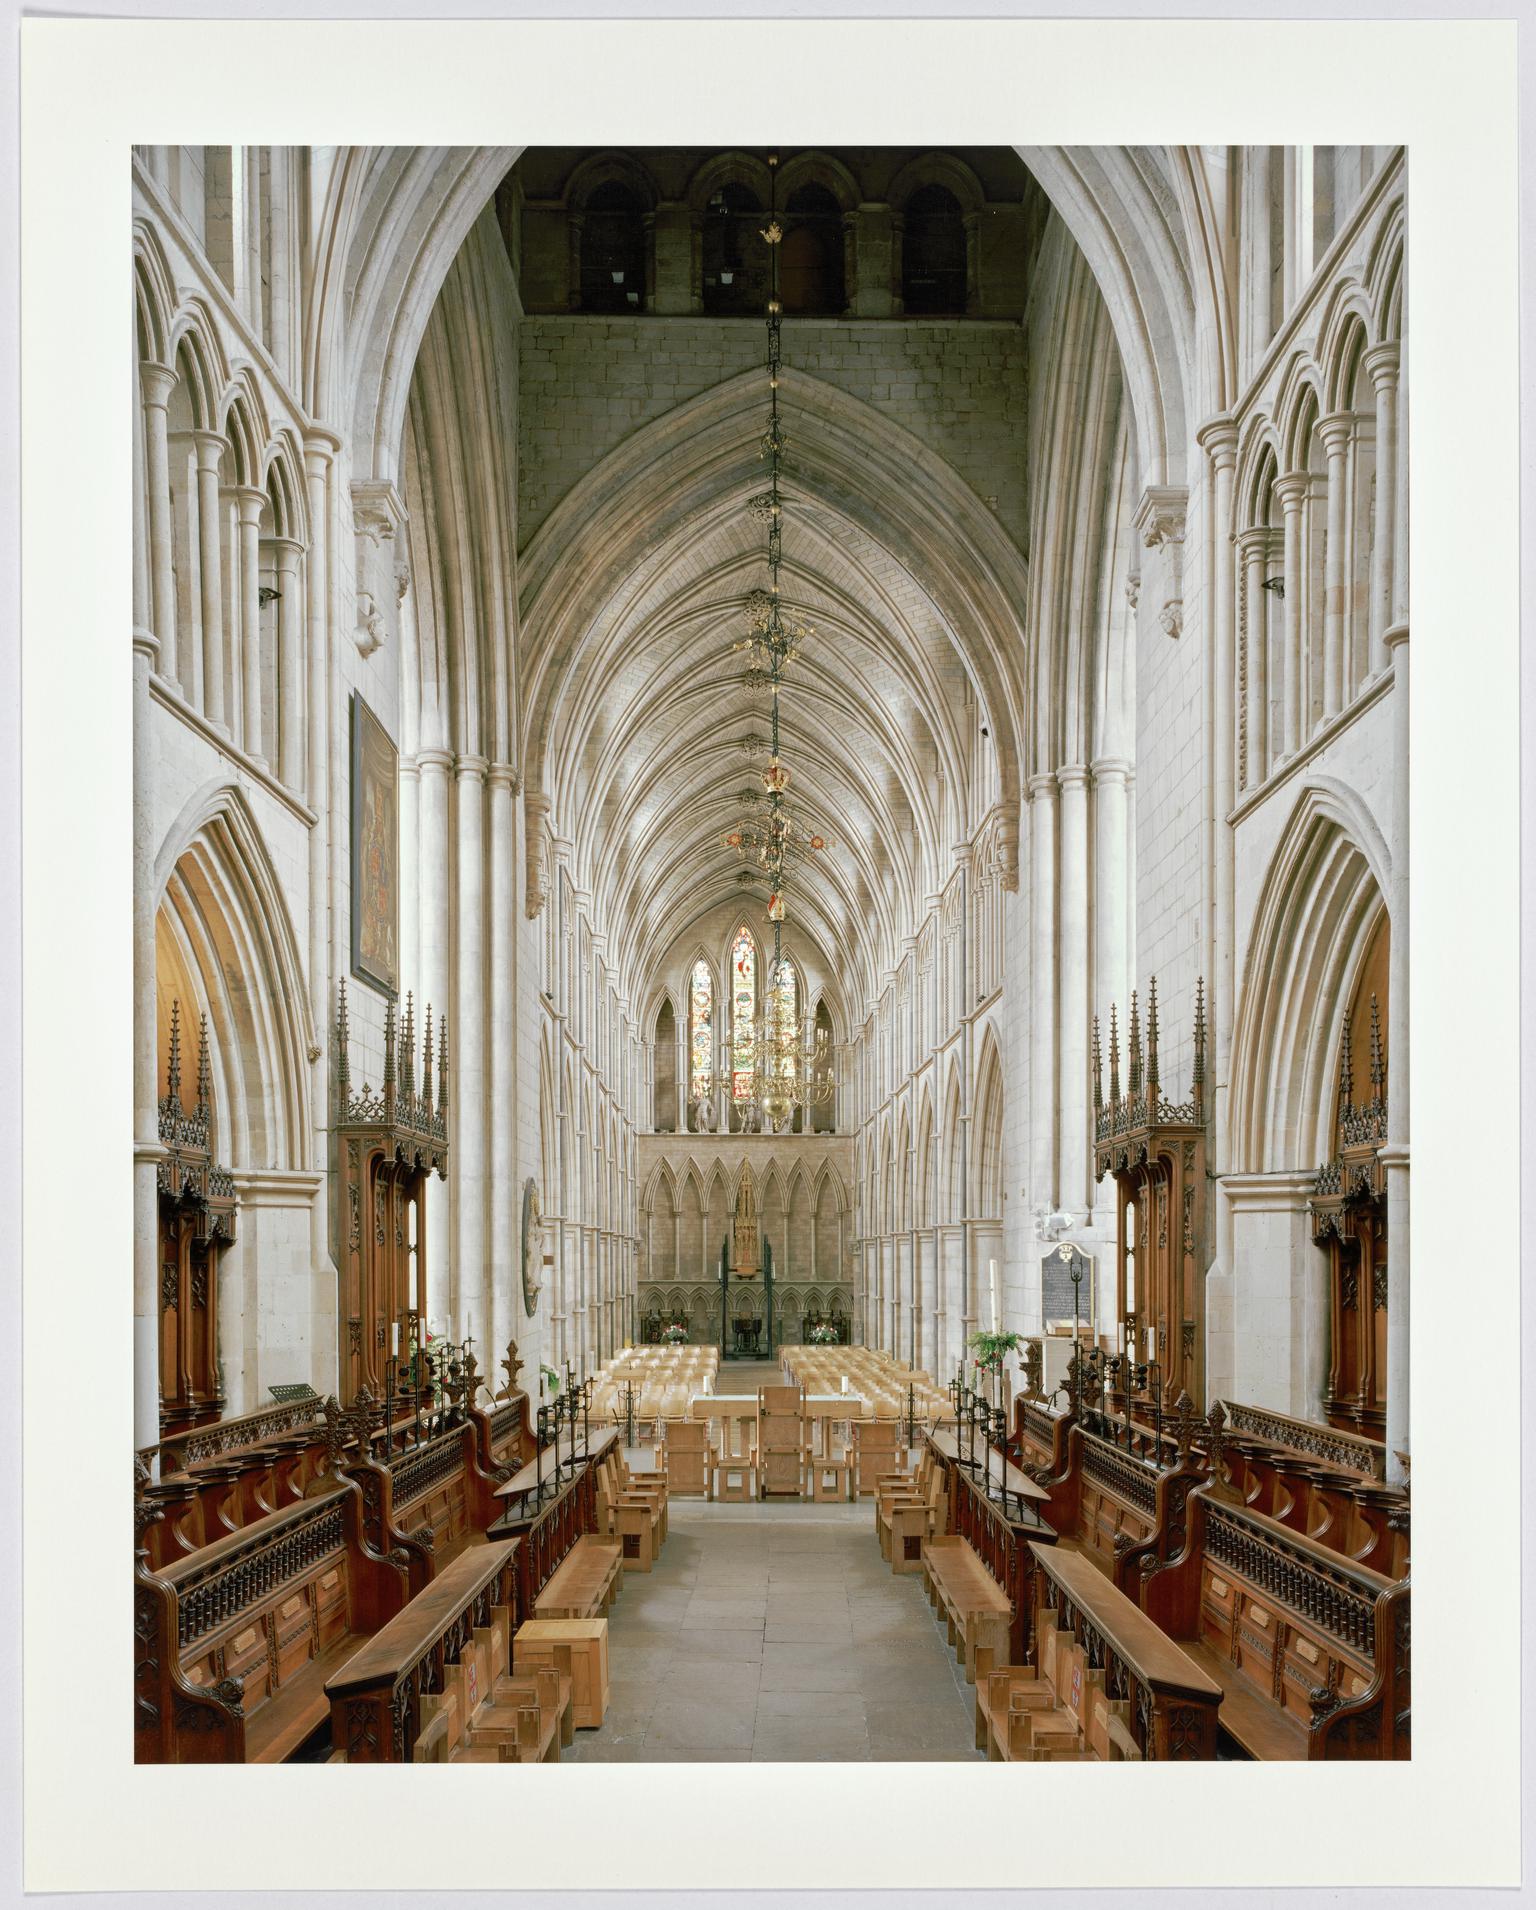 Southwark Cathedral, England